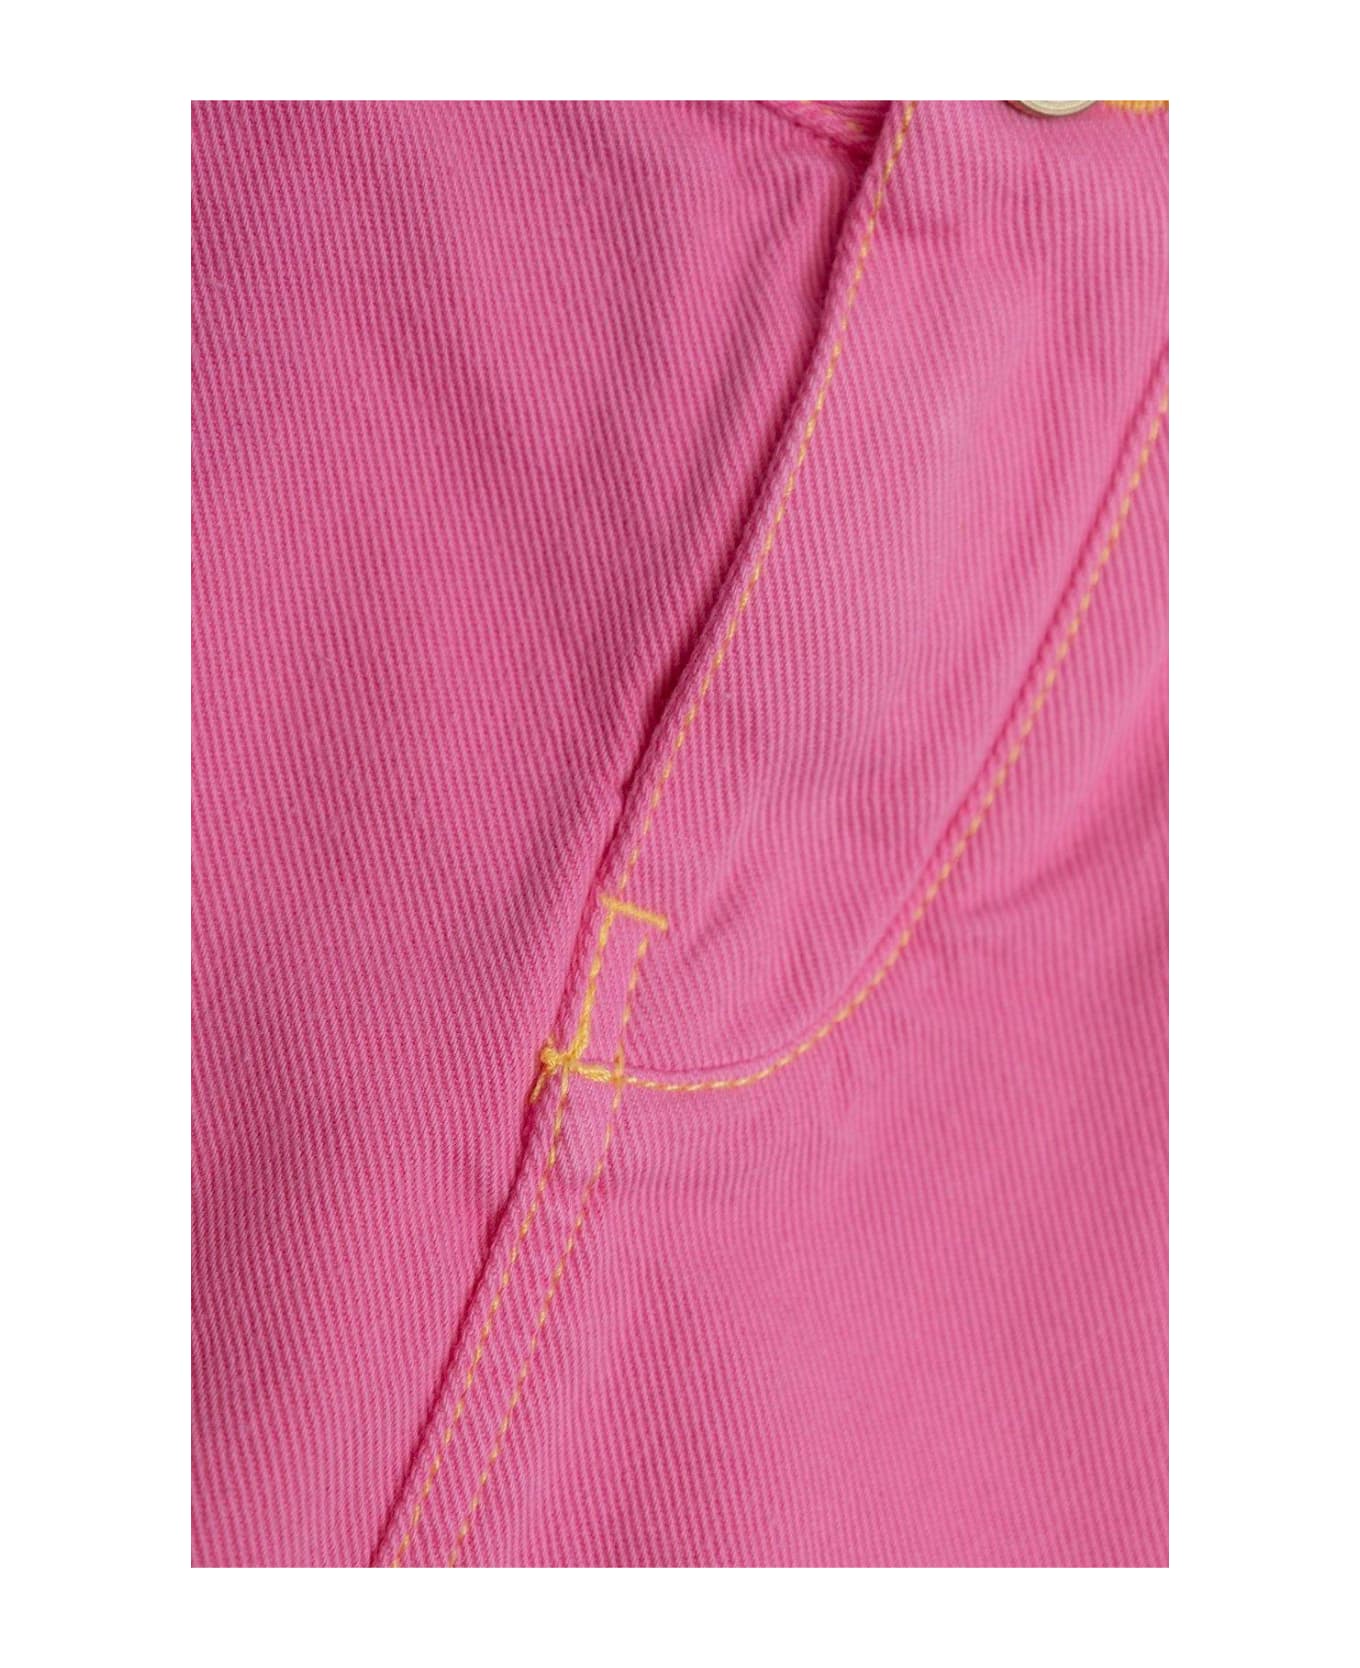 Jacquemus L'enfant Contrast Stitch Twill Skirt - PINK ボトムス